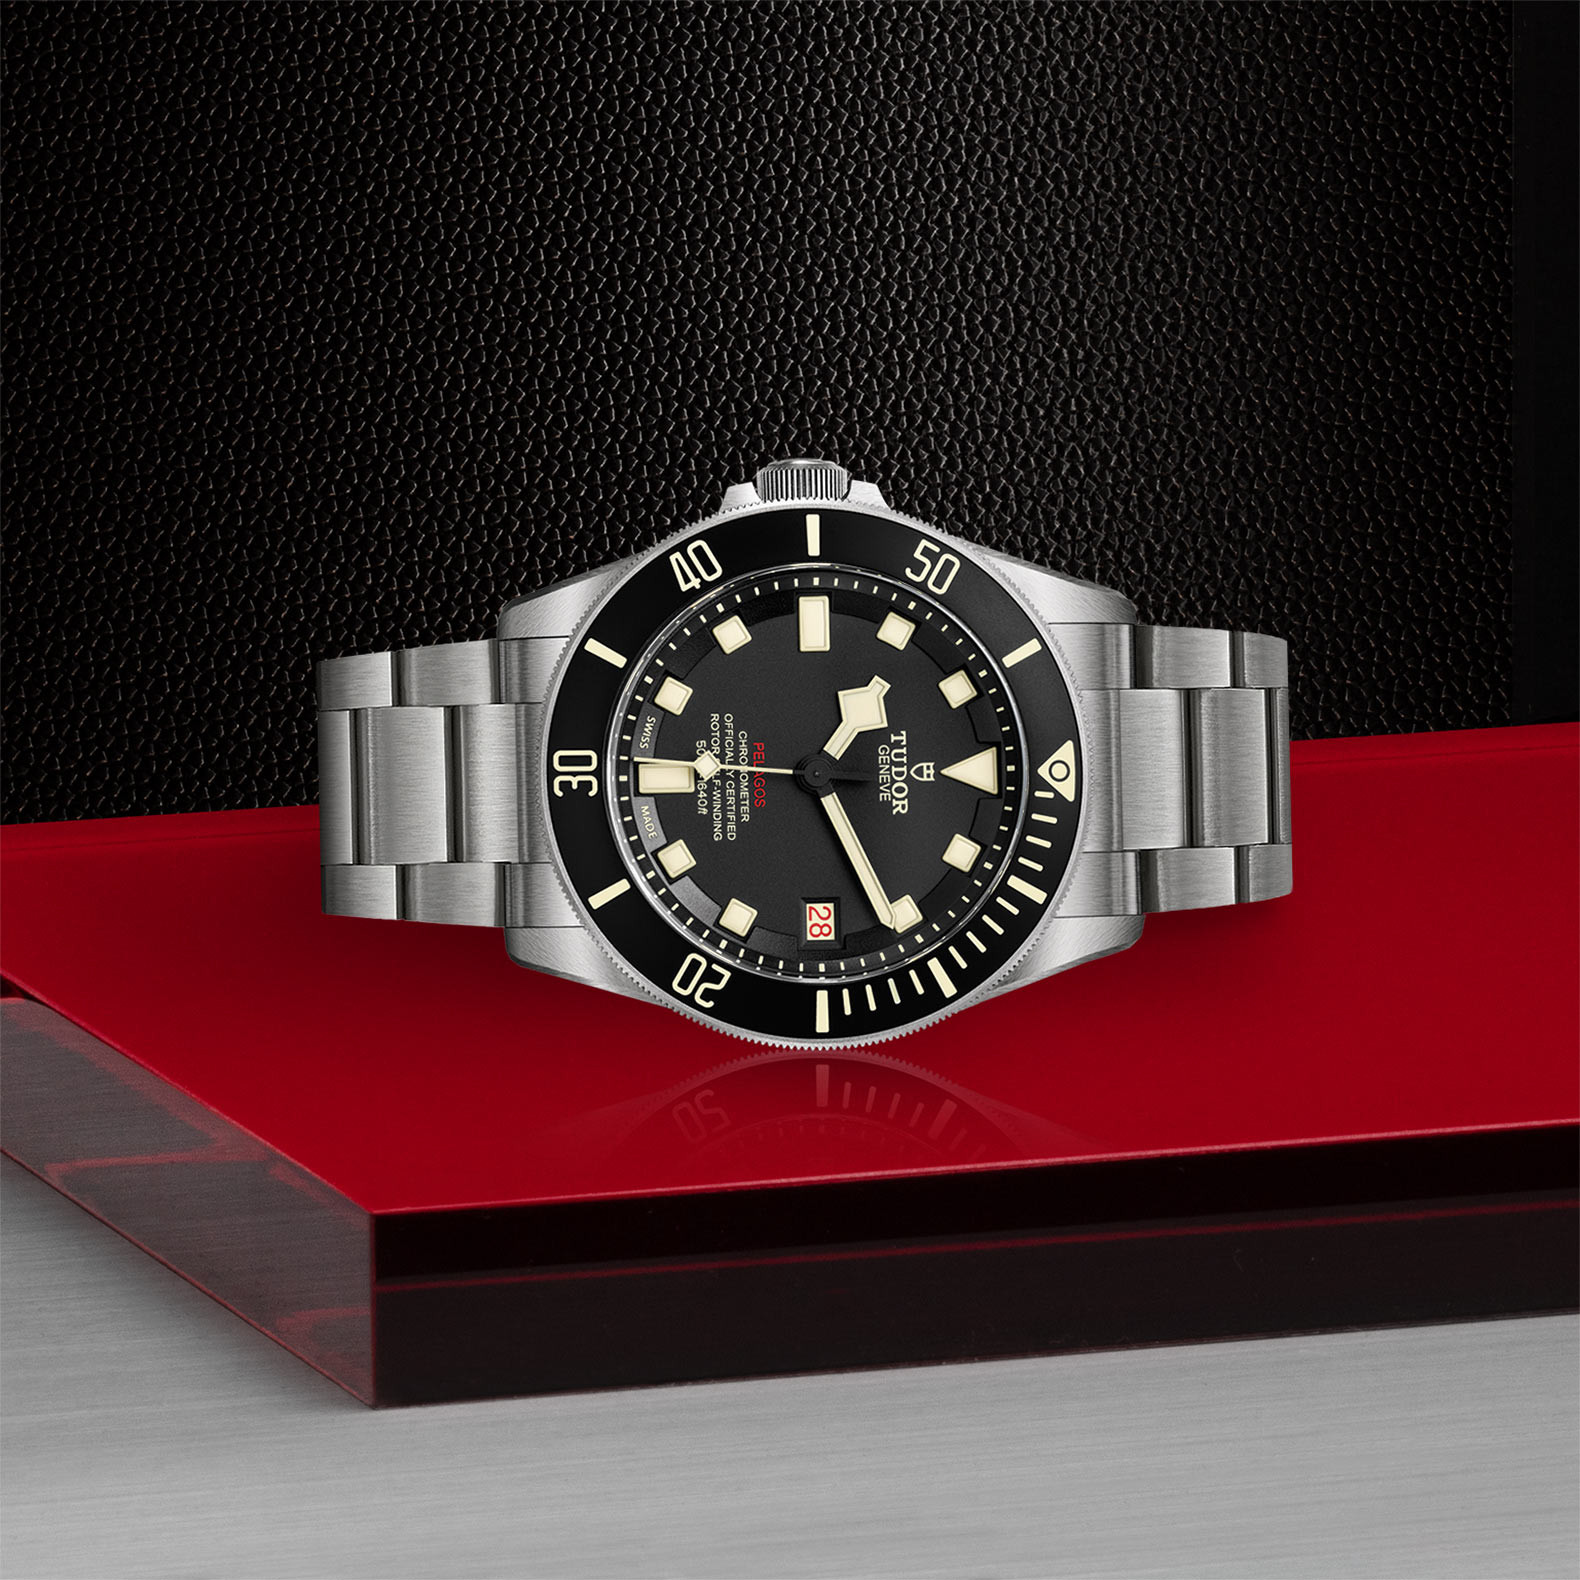 TUDOR Pelagos LHD Watch in Store Laying Down